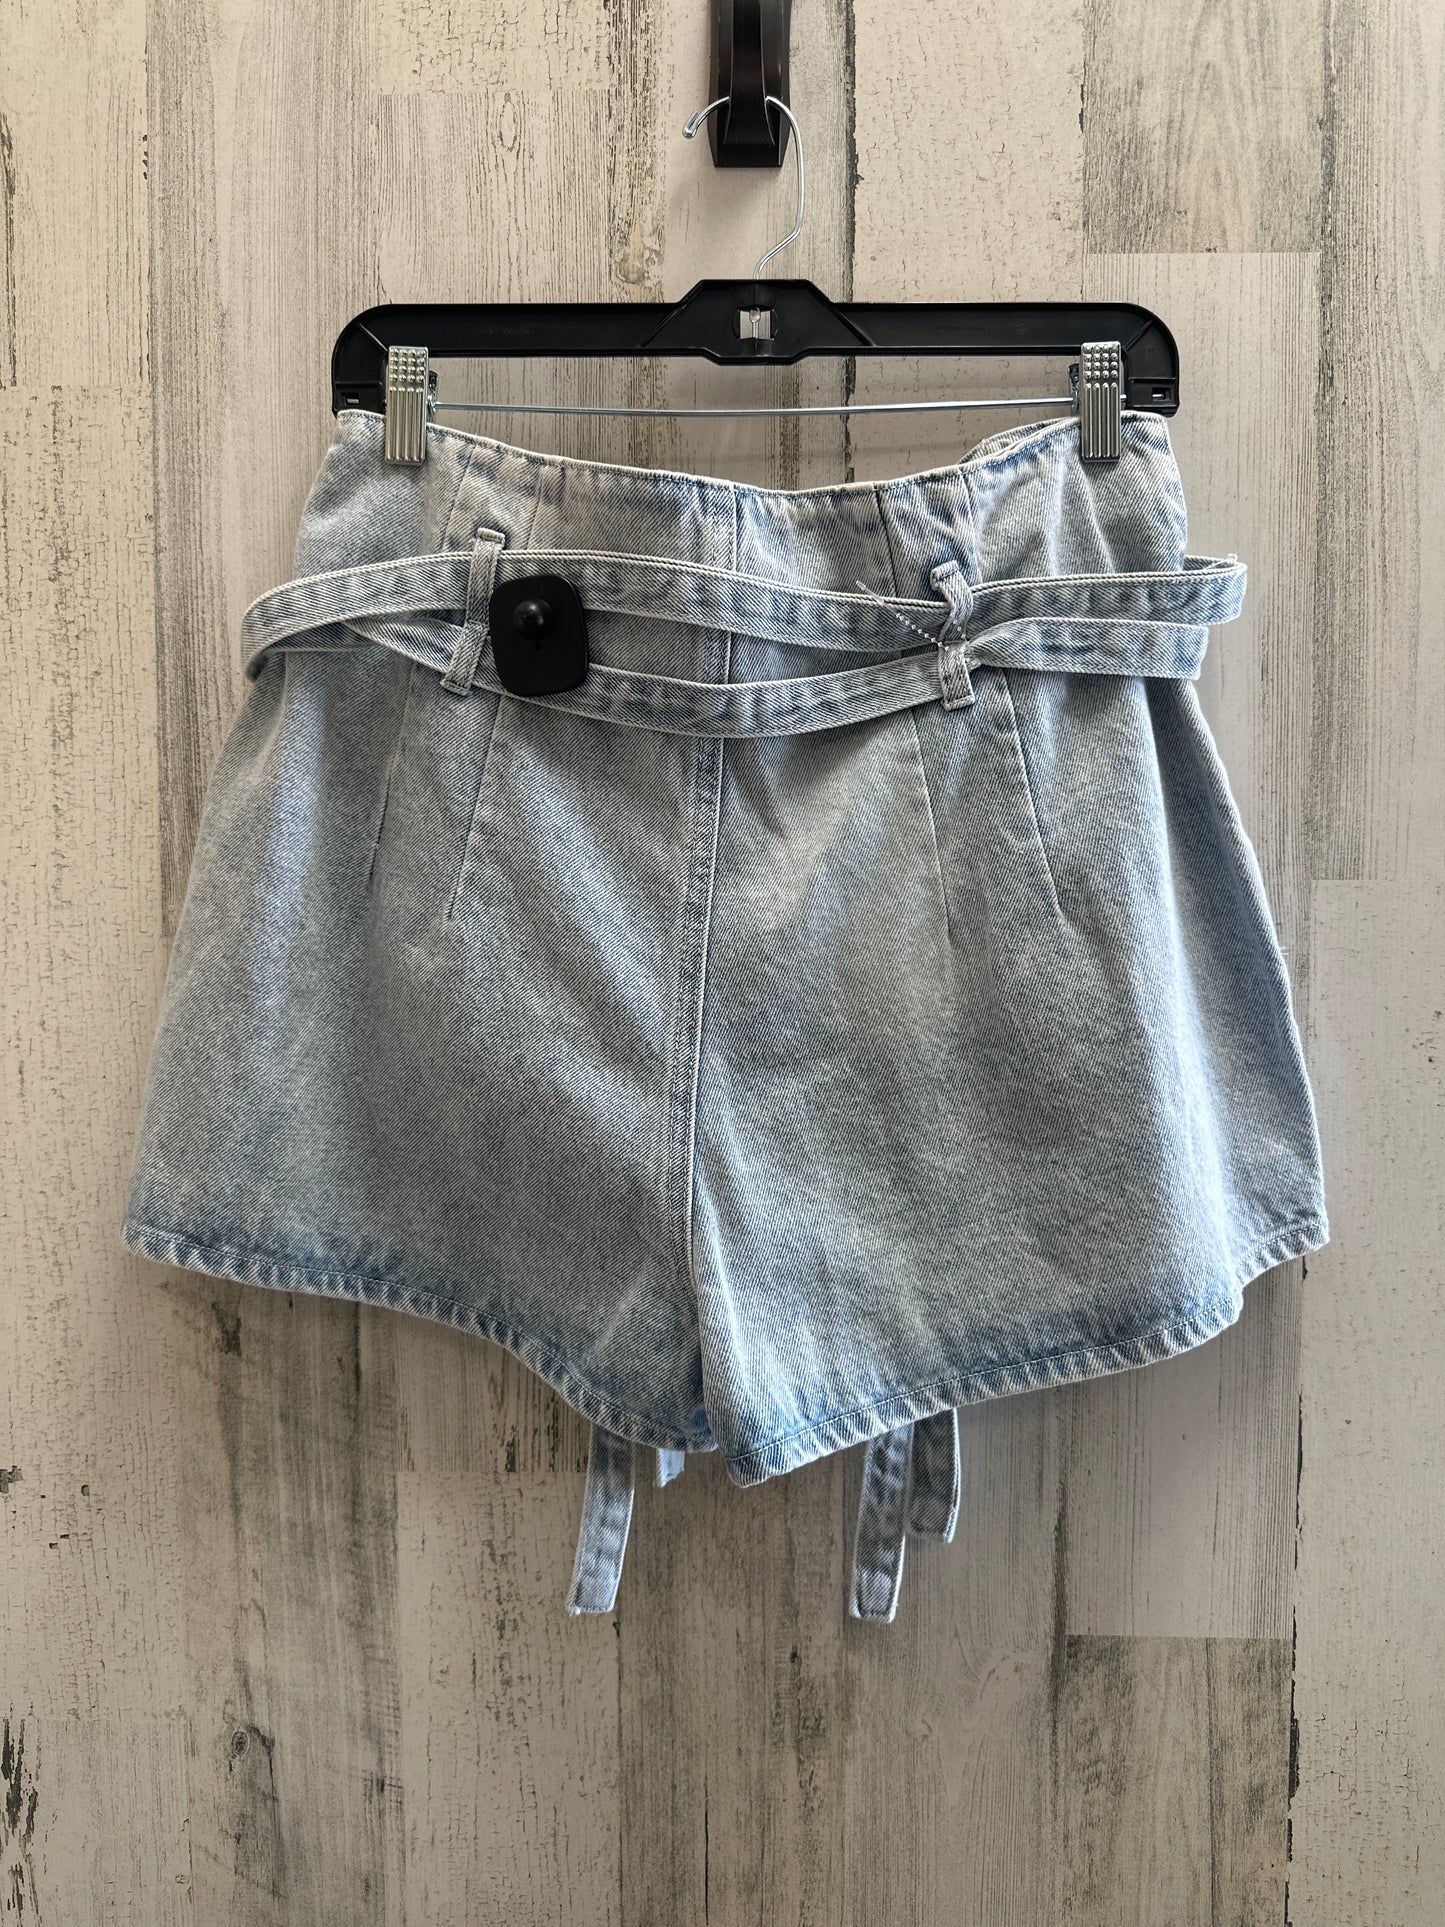 Shorts By Forever 21  Size: 8